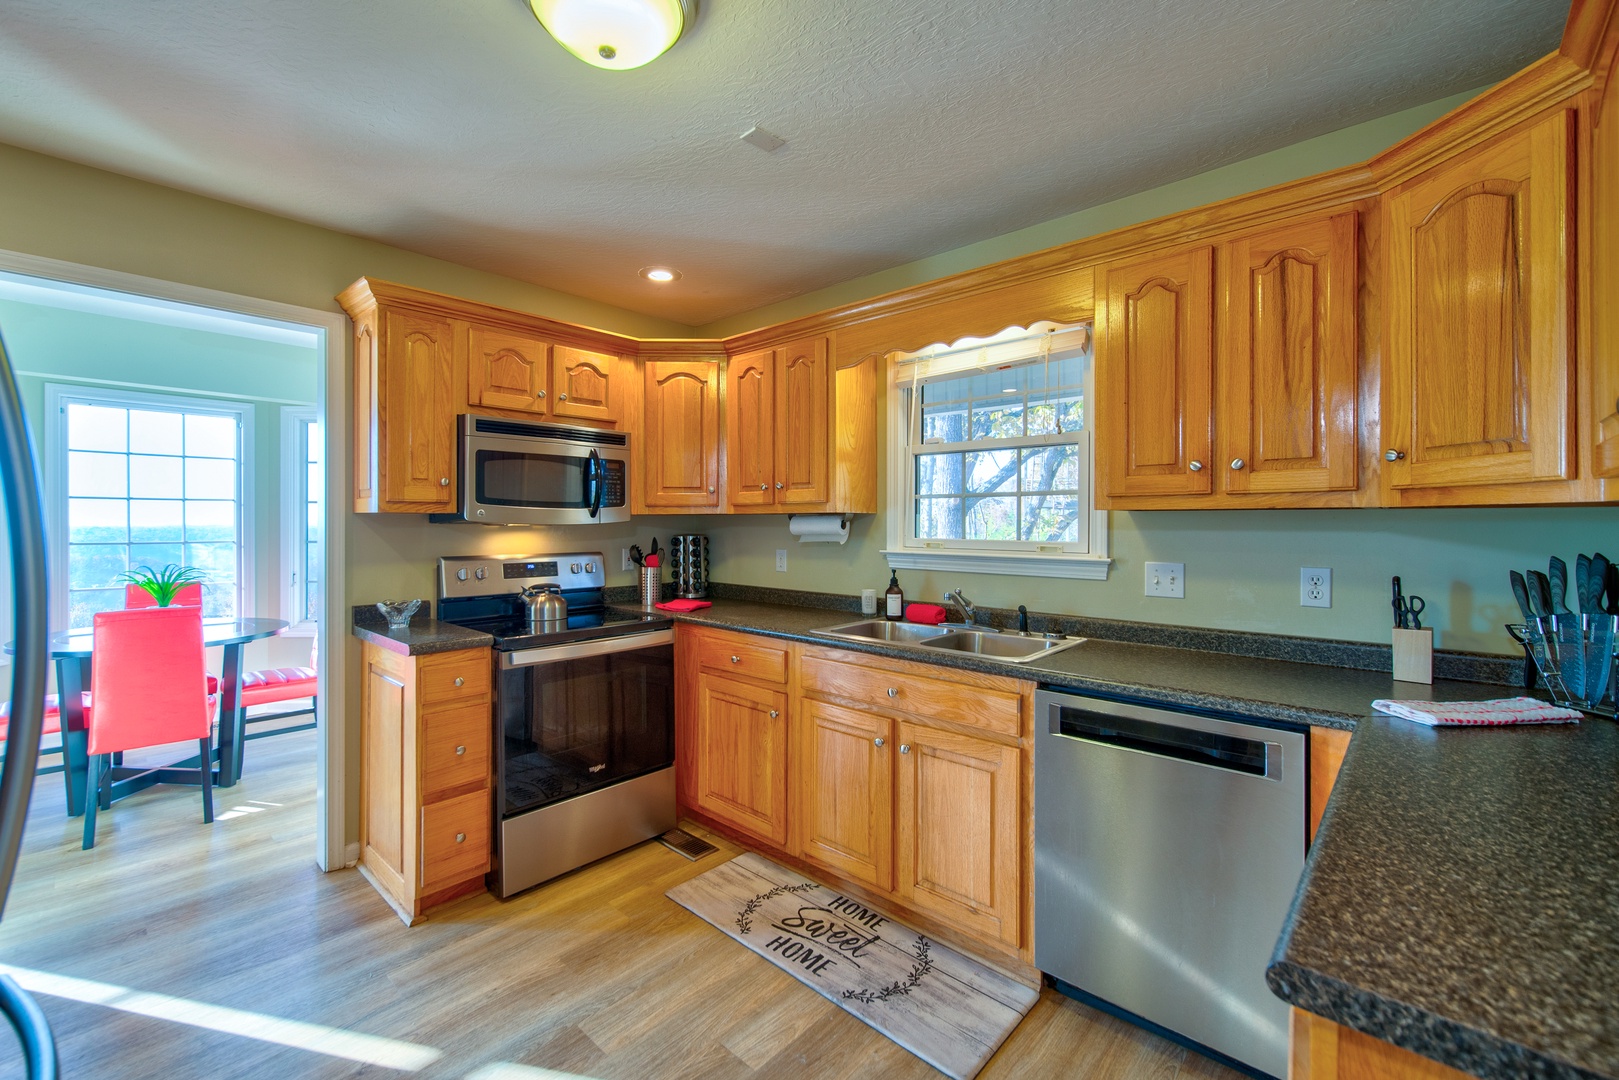 The kitchen is spacious & offers all the comforts of home